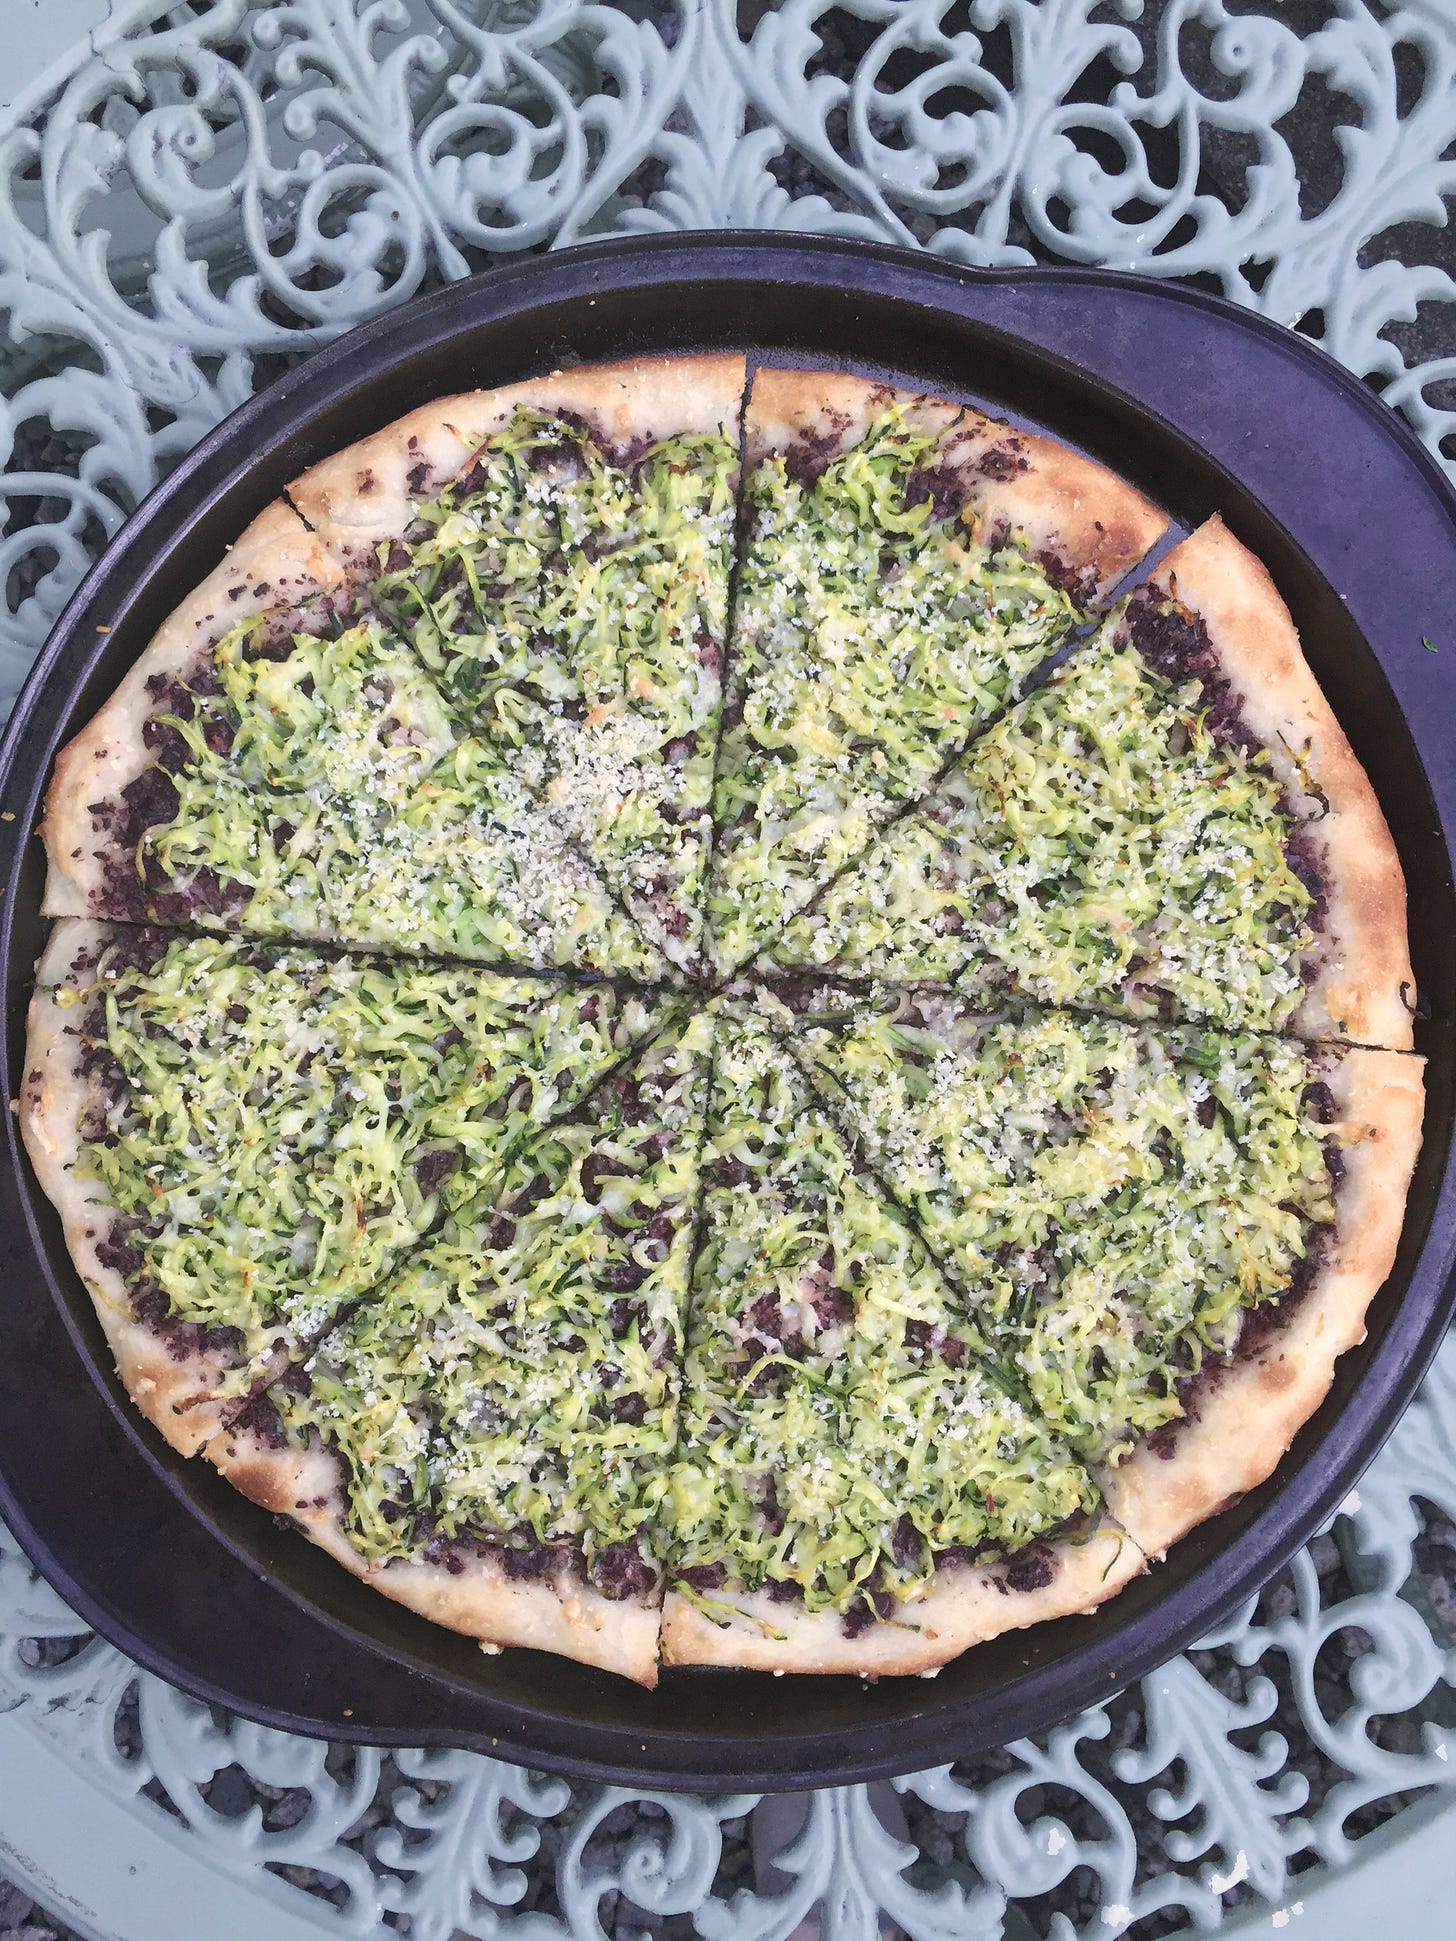 on a blue-green wrought iron table, a large pizza pan containing a pizza with shredded zucchini, breadcrumbs, and black olive tapenade. The crust is browned and bubbled at the edges.